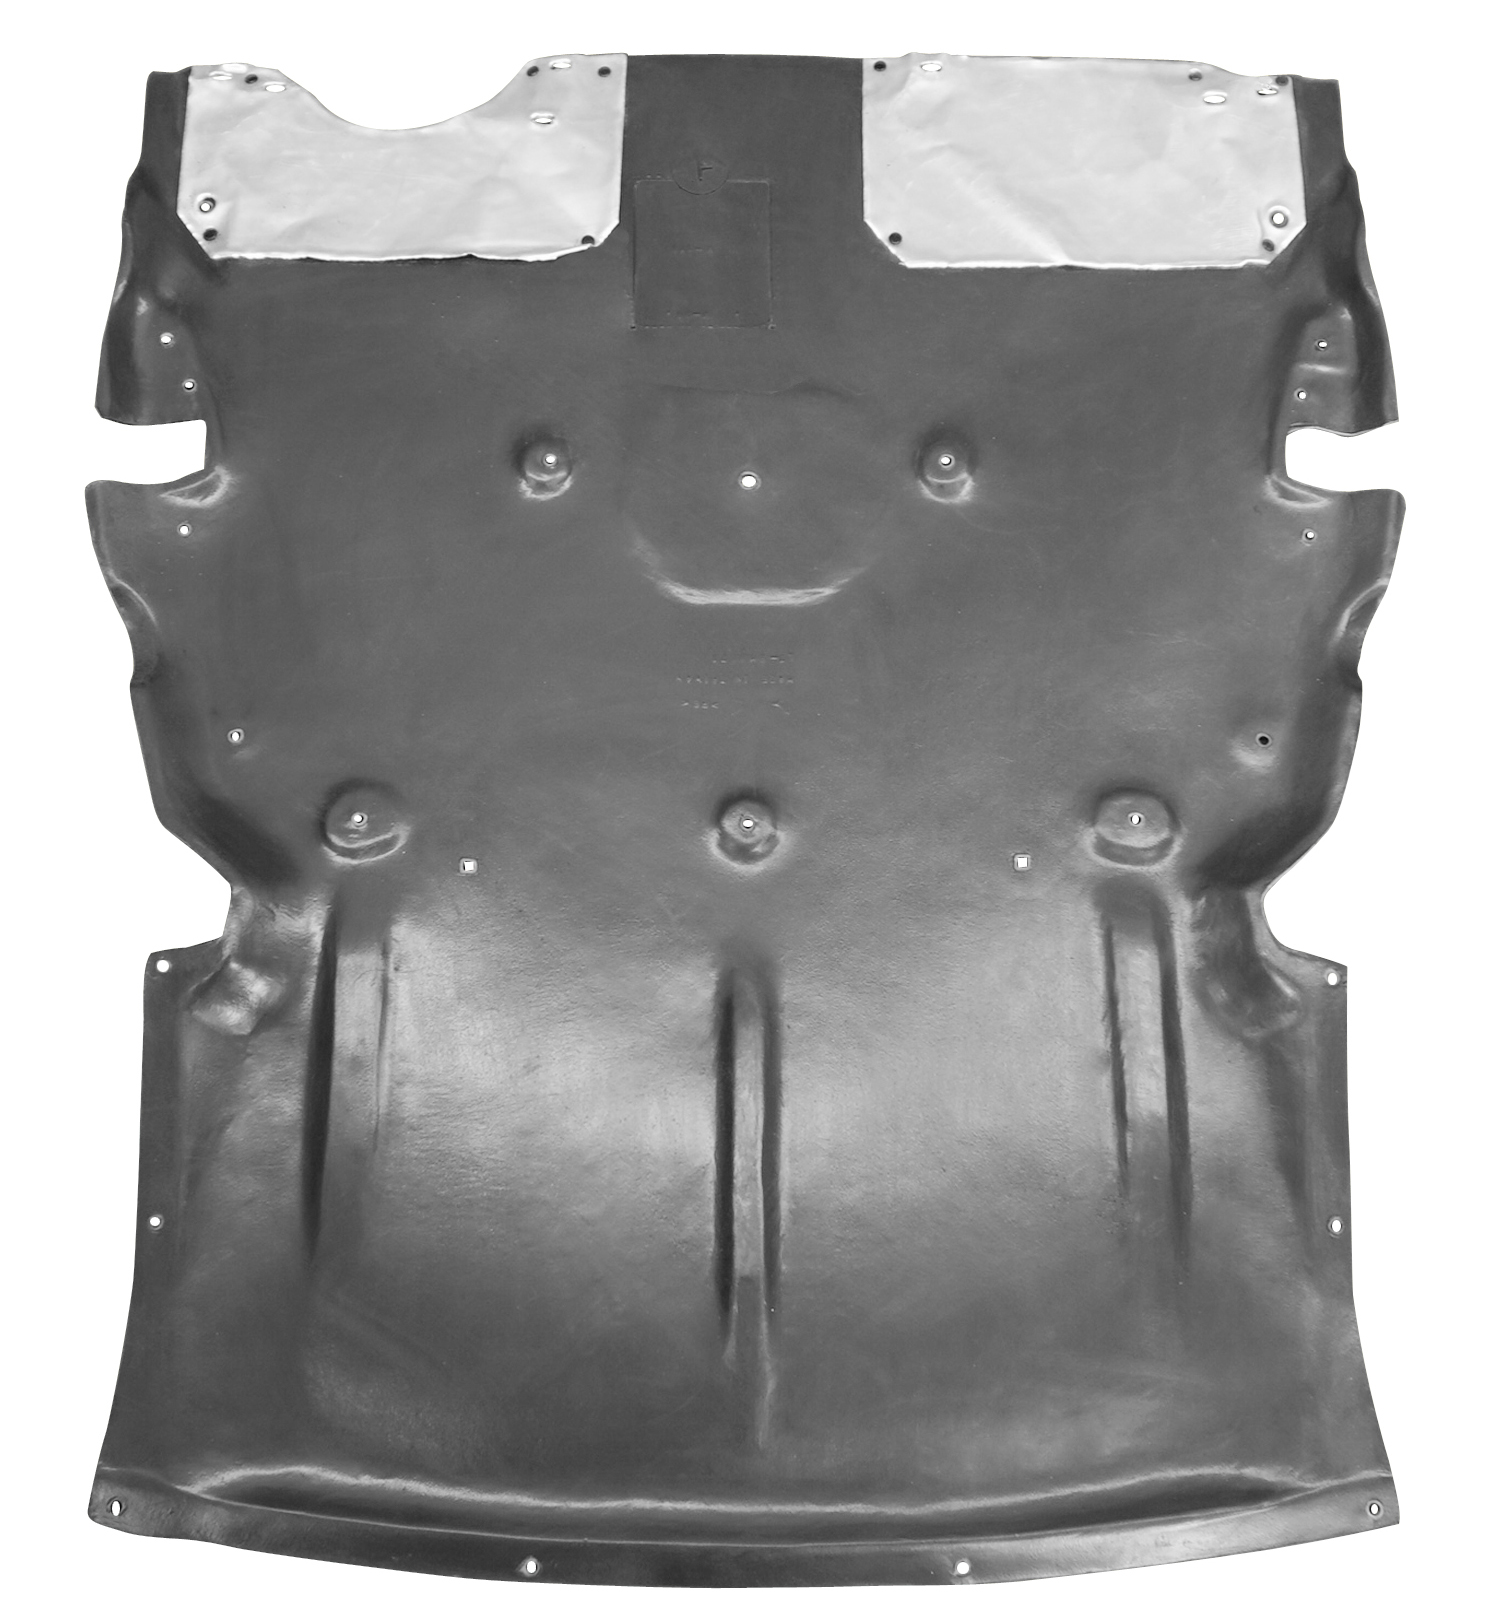 Aftermarket UNDER ENGINE COVERS for BMW - 228I, 228i,14-16,Lower engine cover